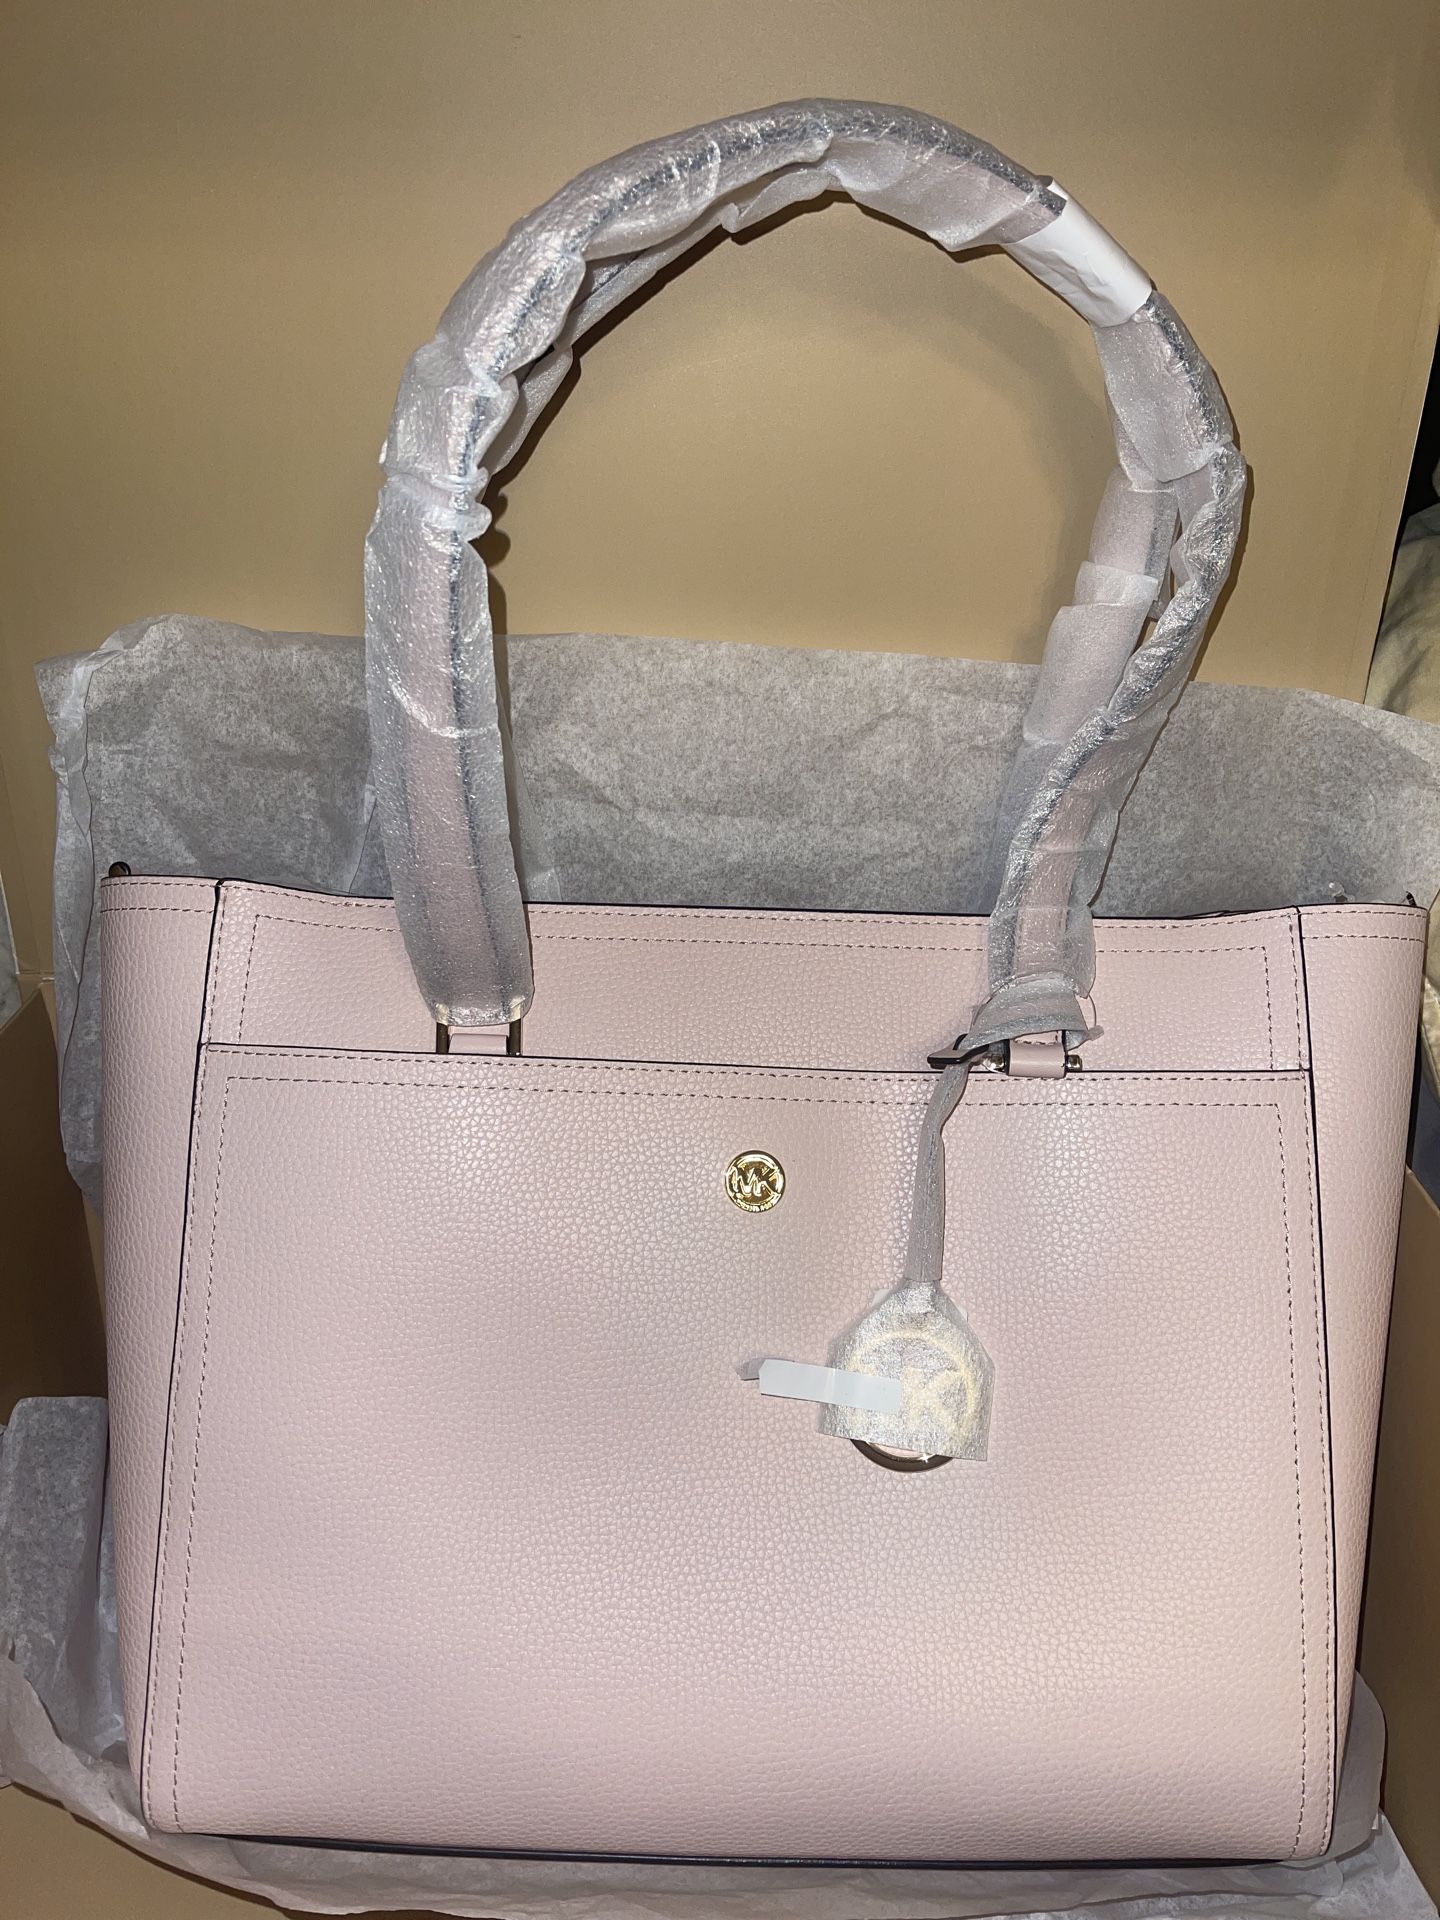 Michael Kors Purse Brand New With Tags 